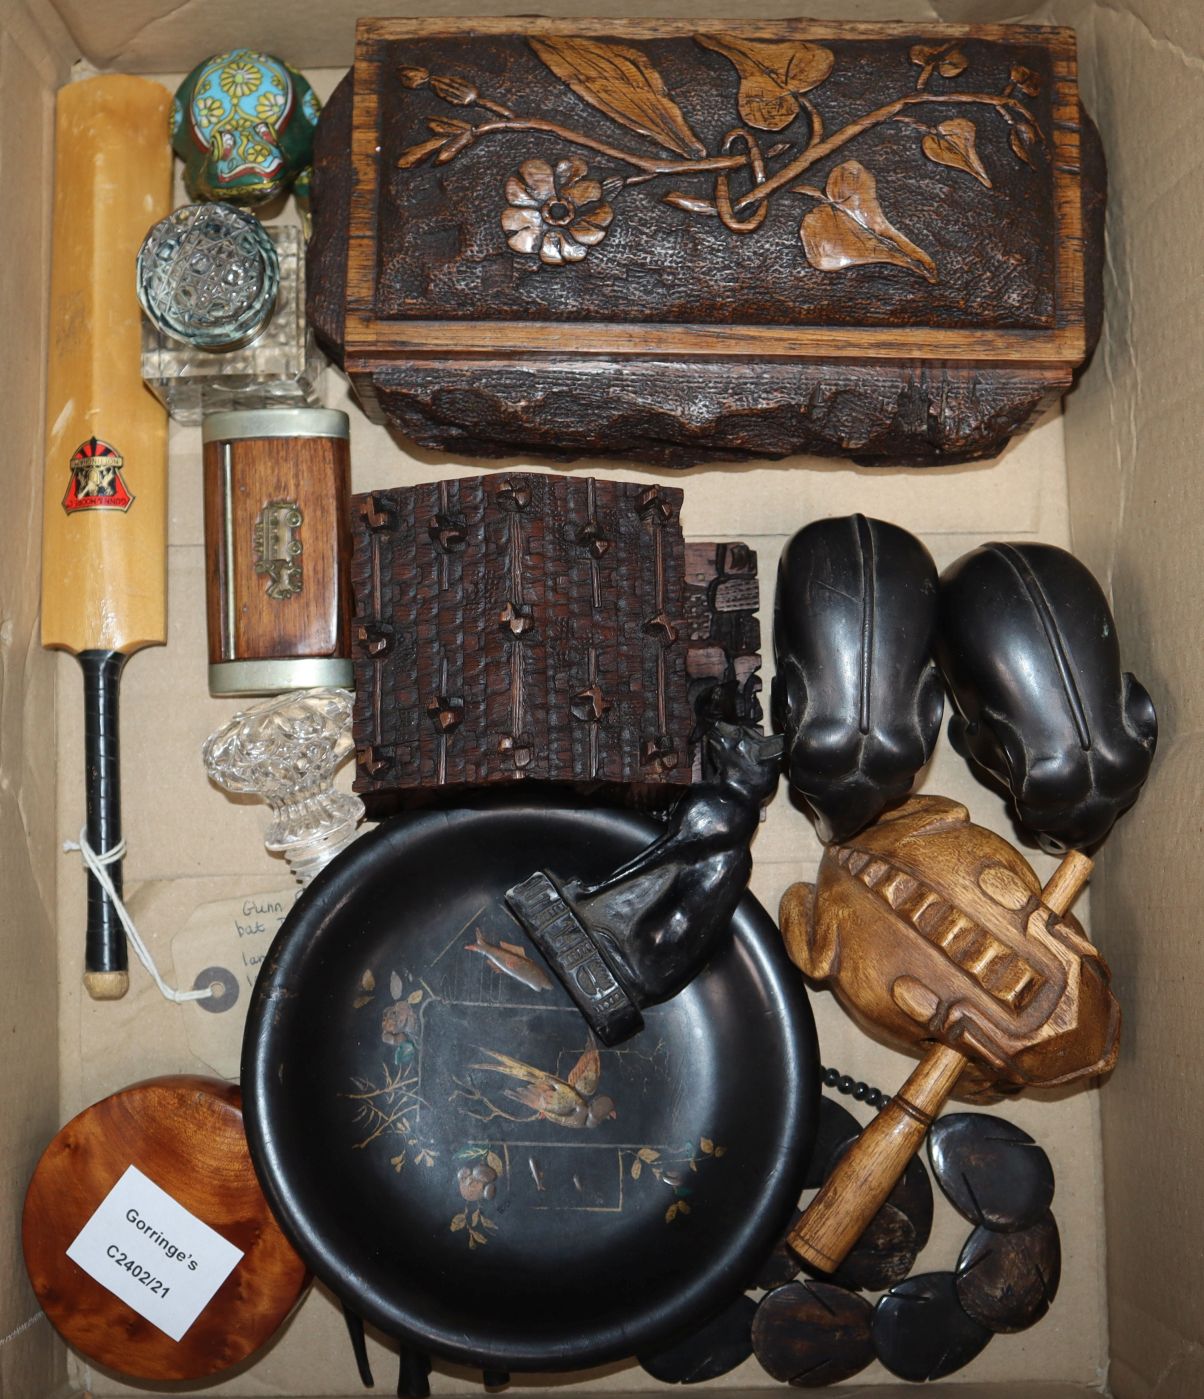 A group of curios and treen, etc.